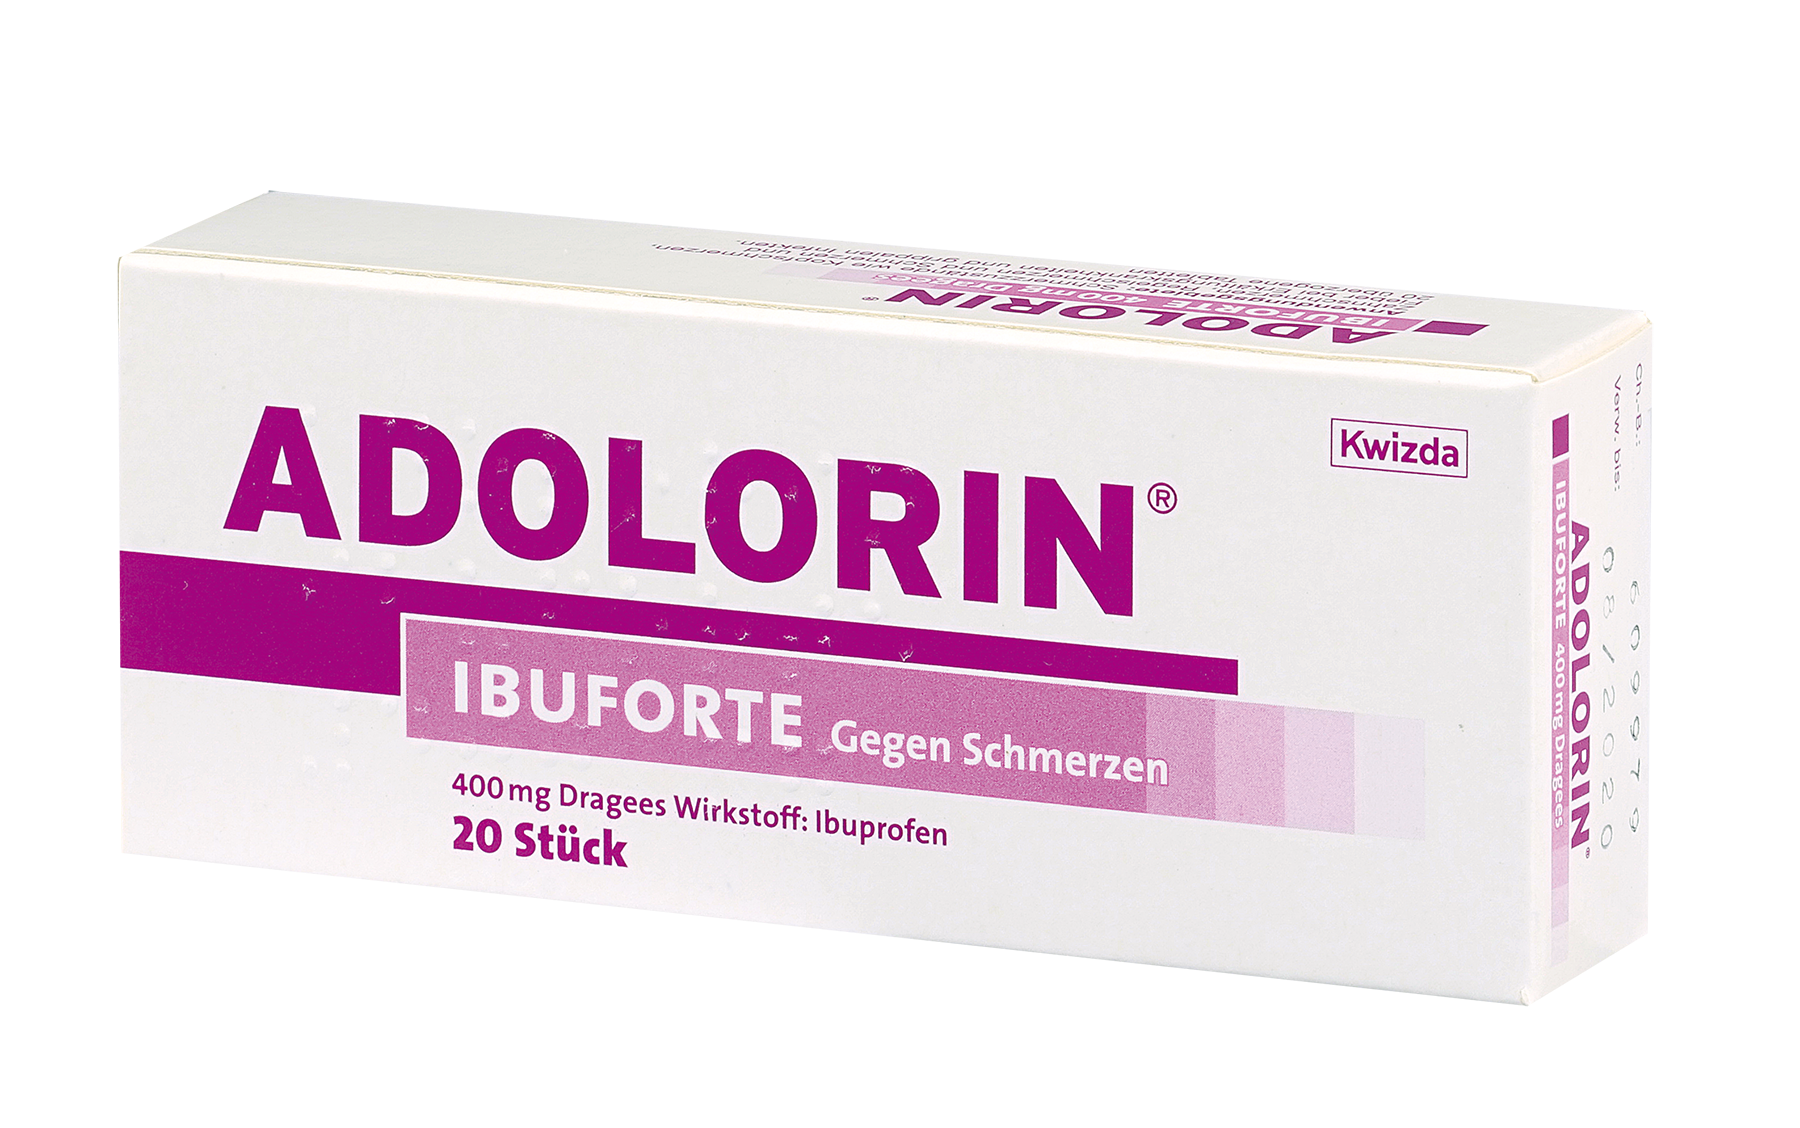 ADOLORIN IBUFORTE 400 mg Dragees